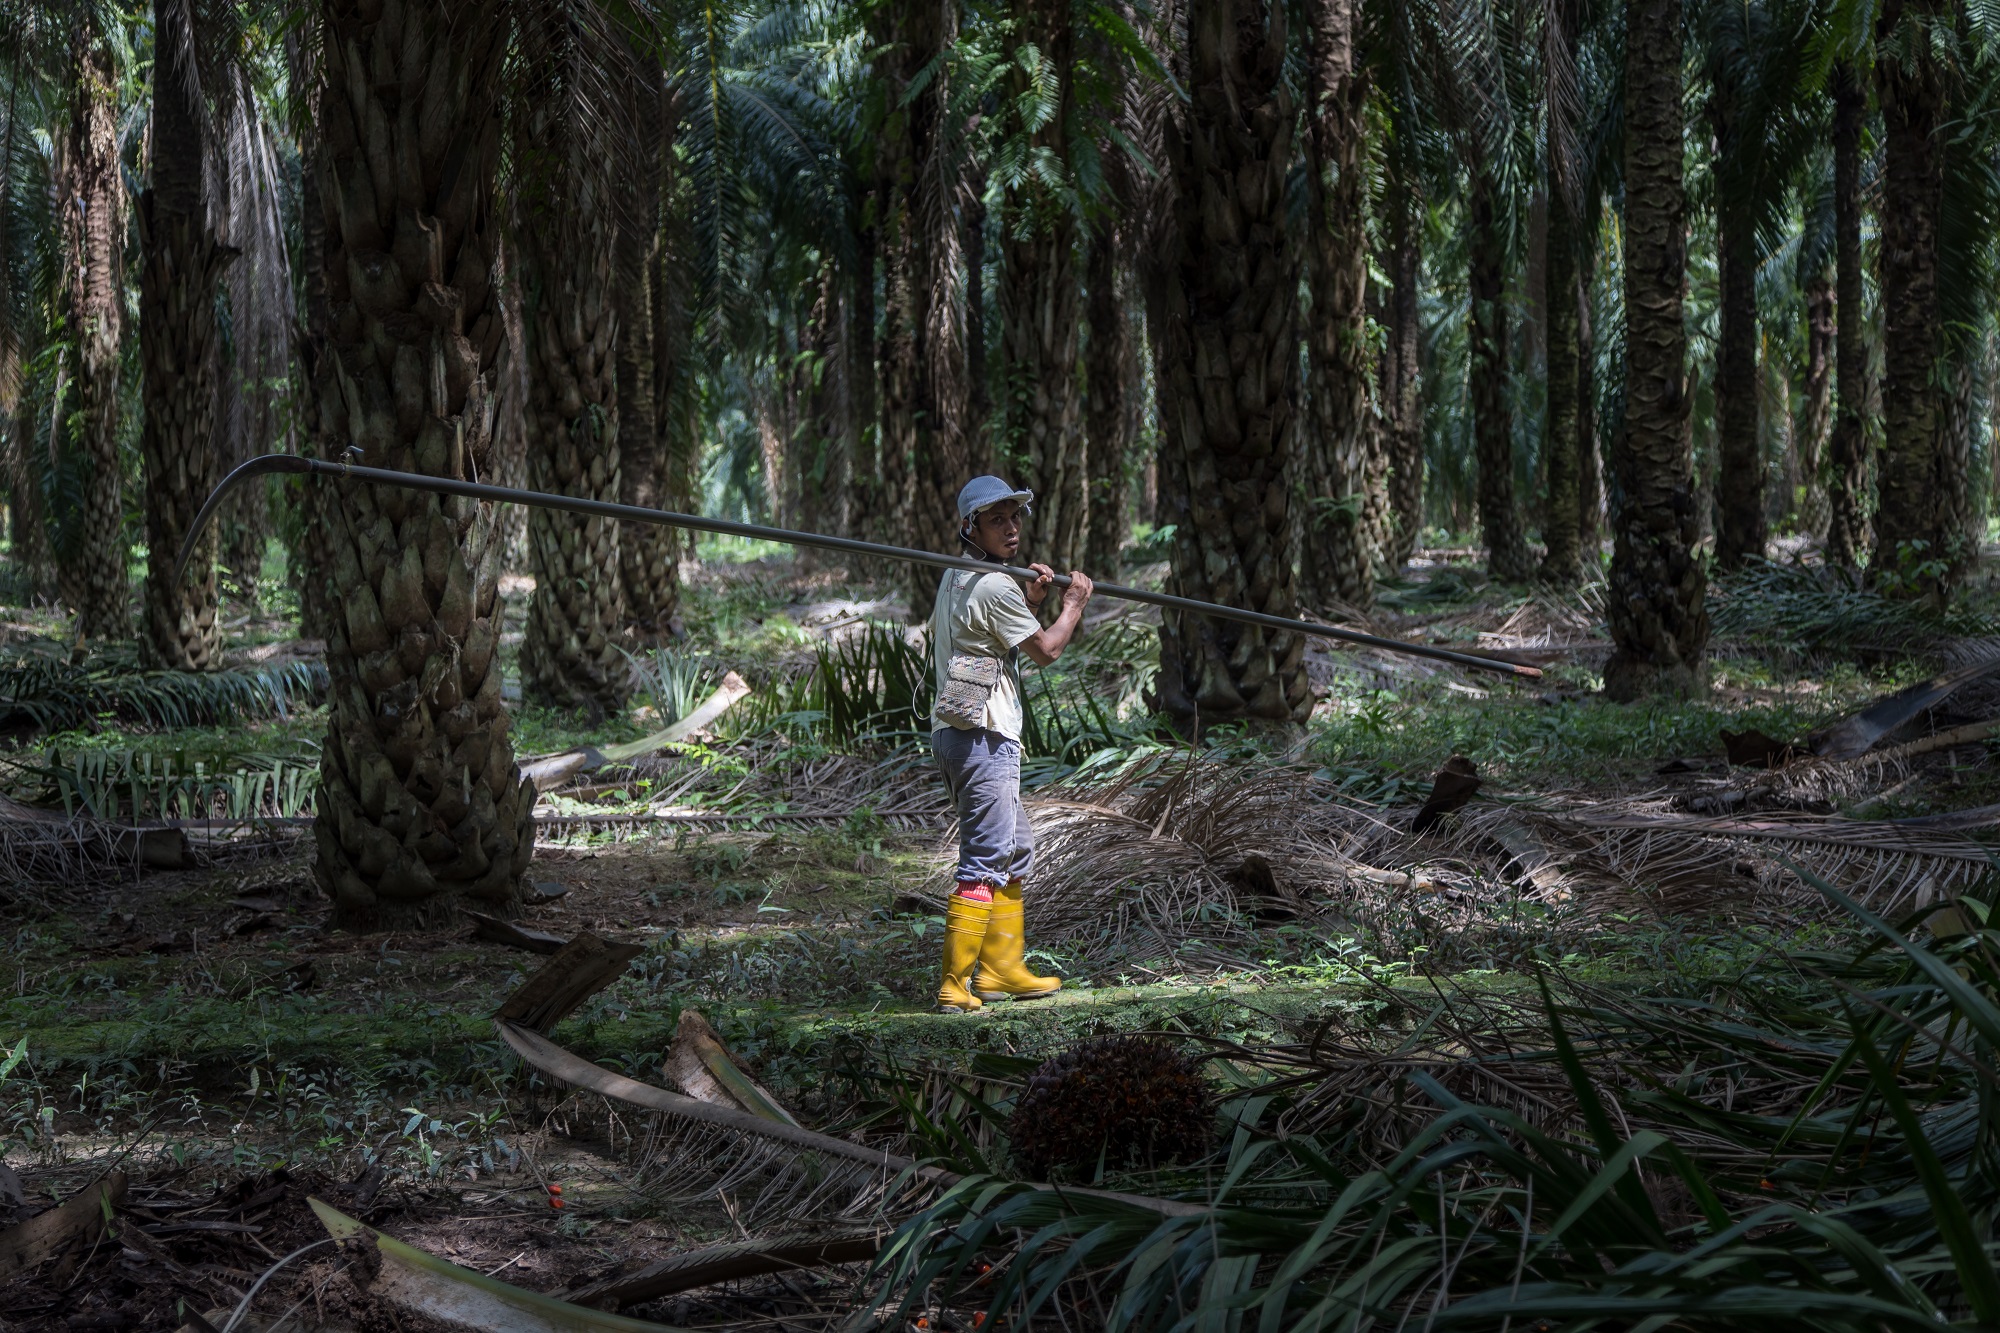 Workers - Palm oil plantation 